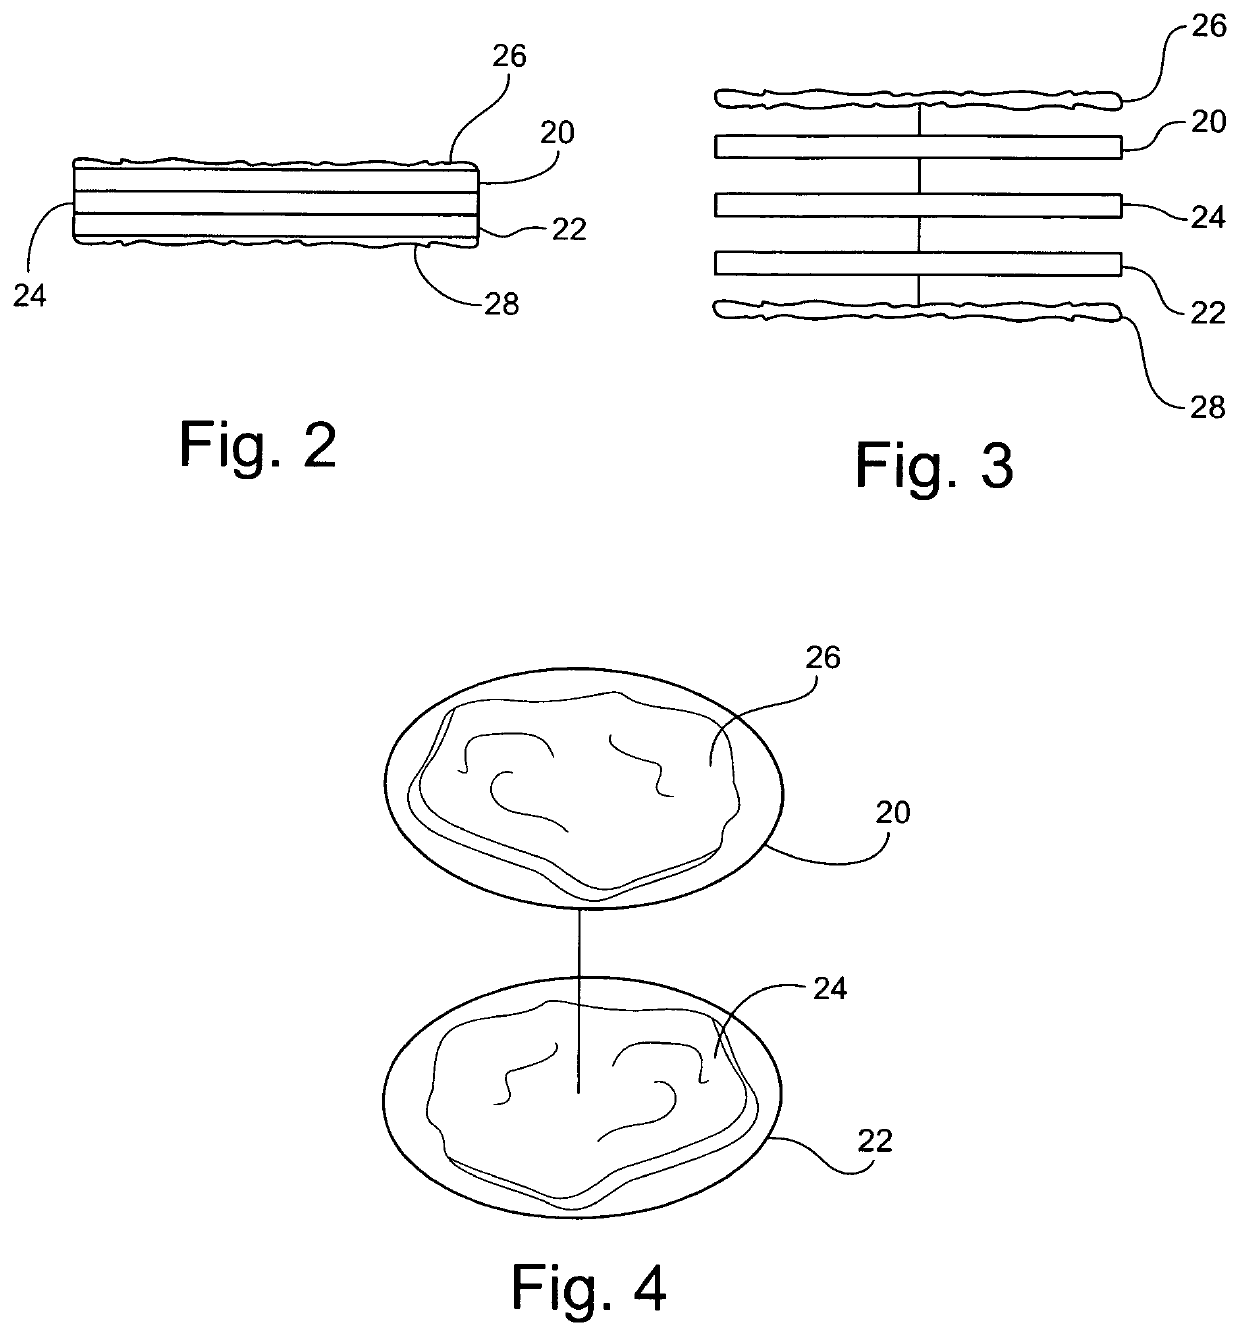 Prosthodontic tool and method for placing and fitting crowns and inlays